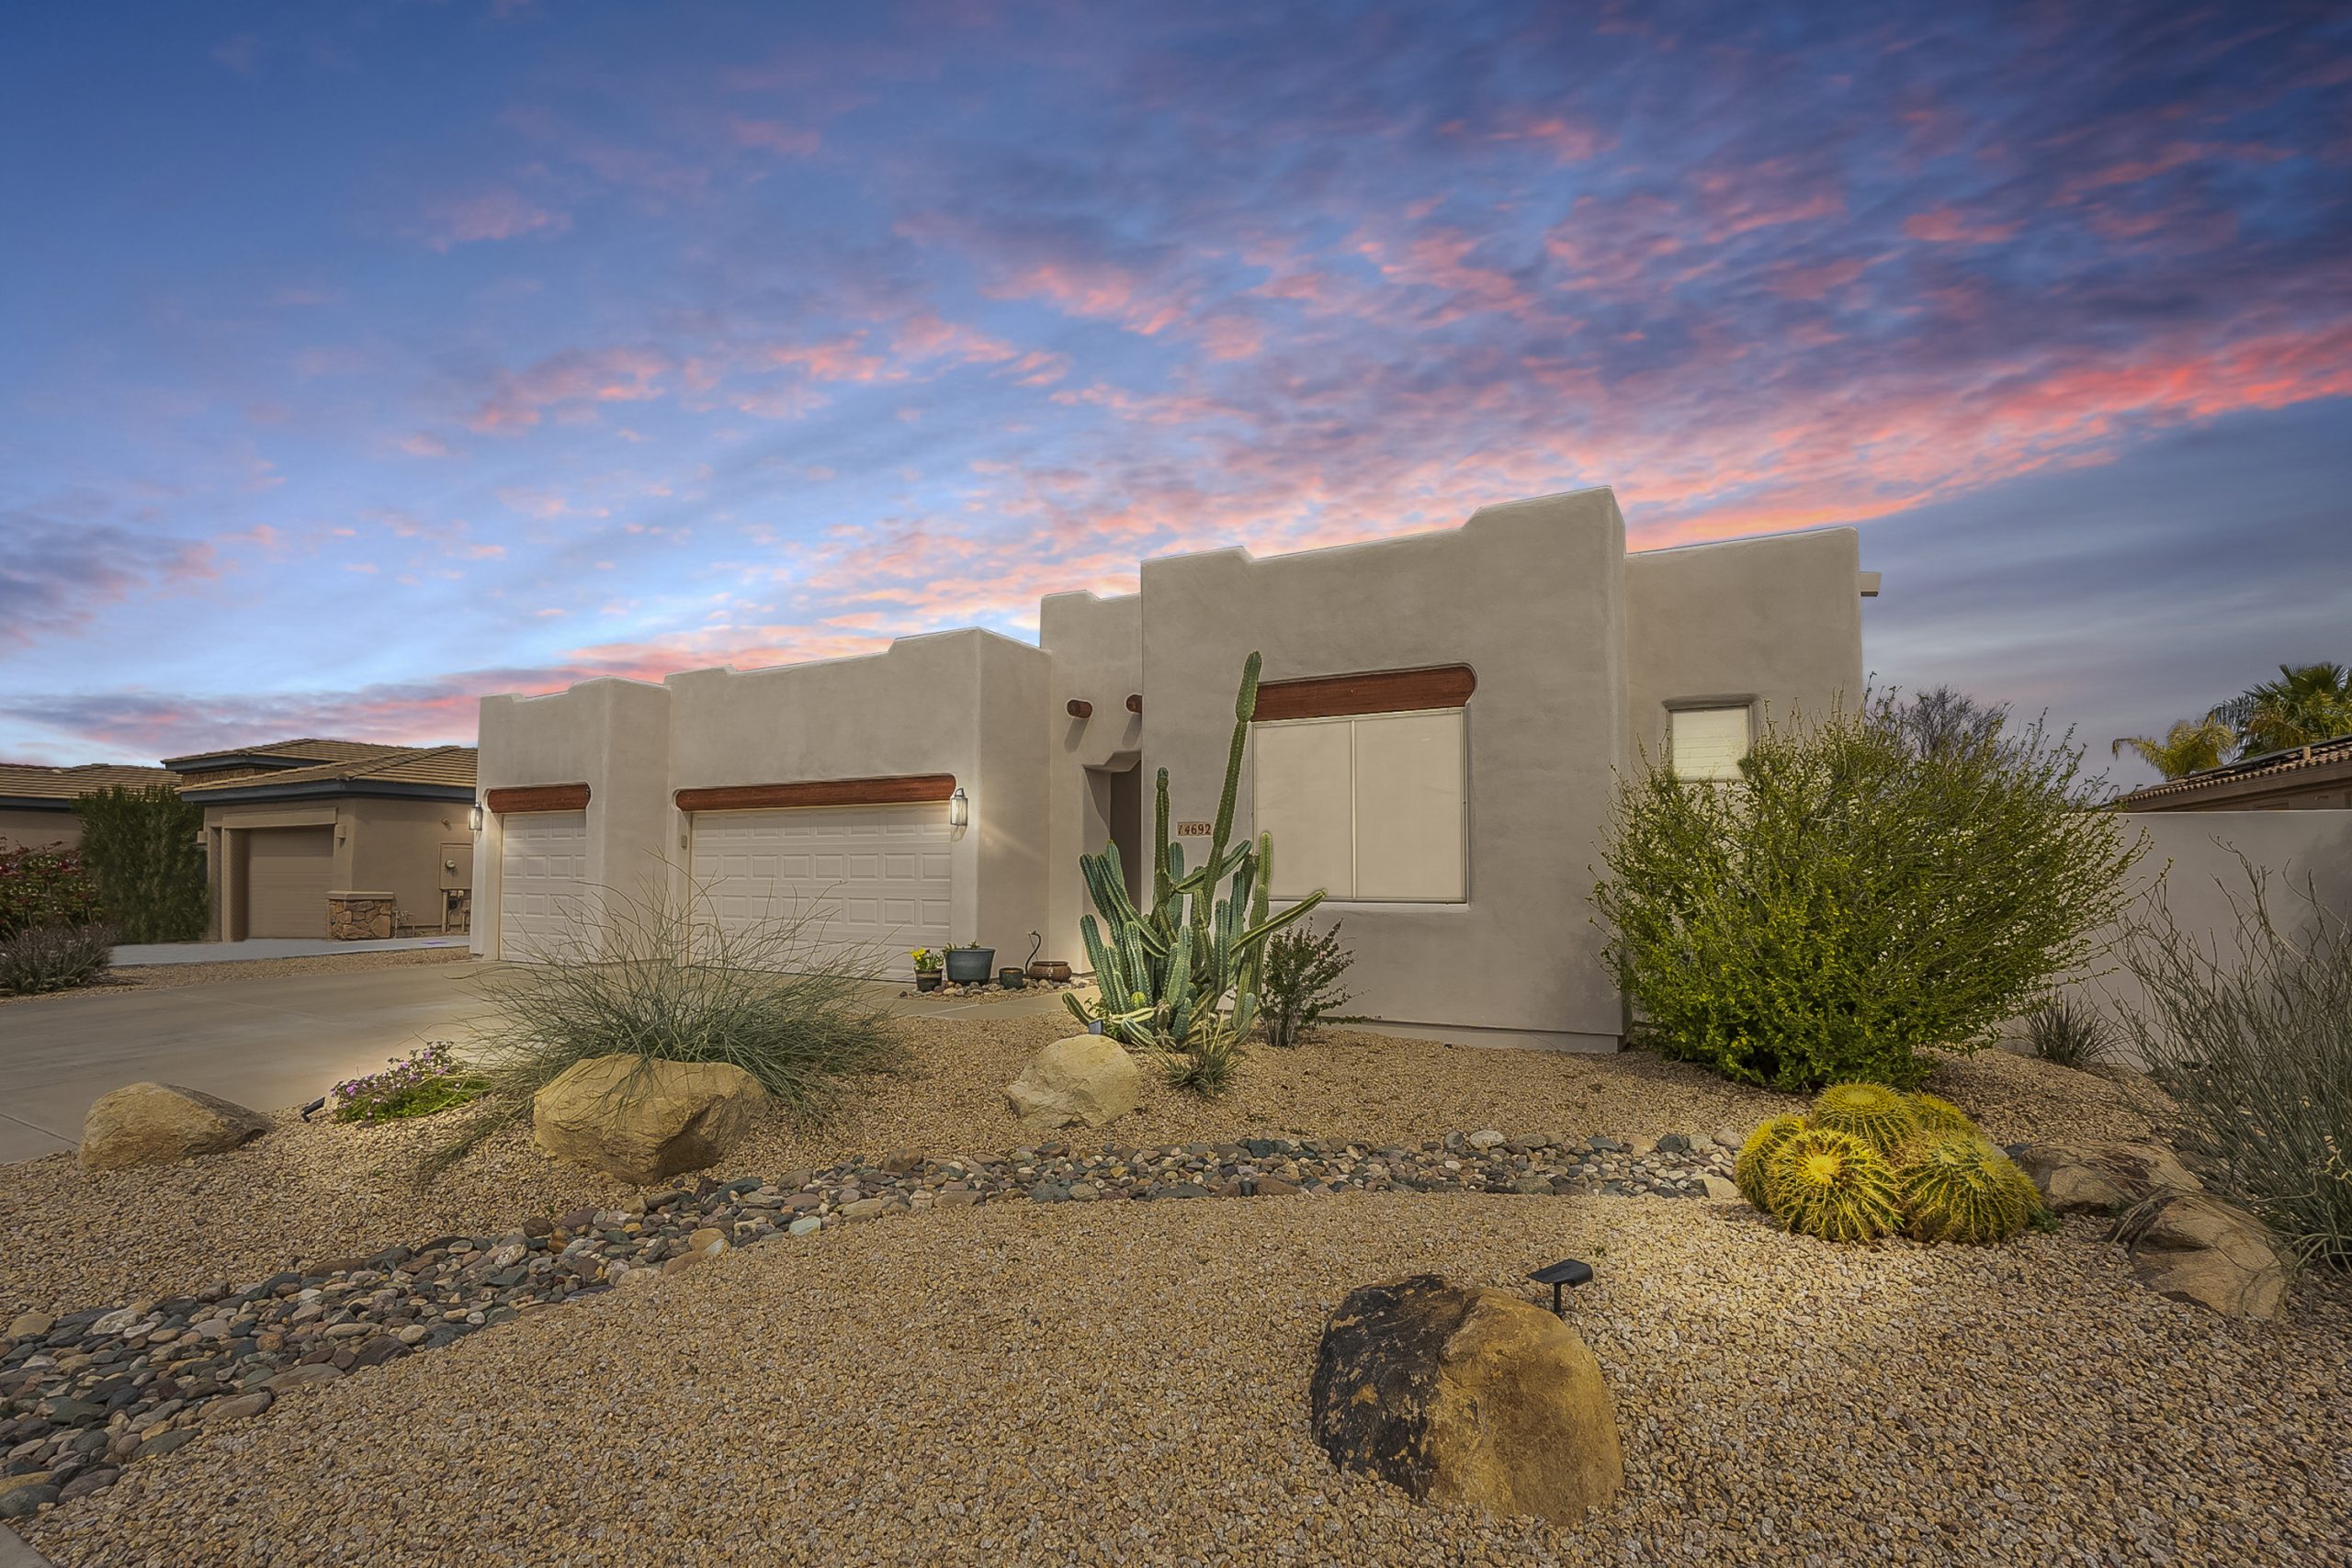 real estate listing photo showing the front of an adobe style home in goodyear, az with a 3 car garage